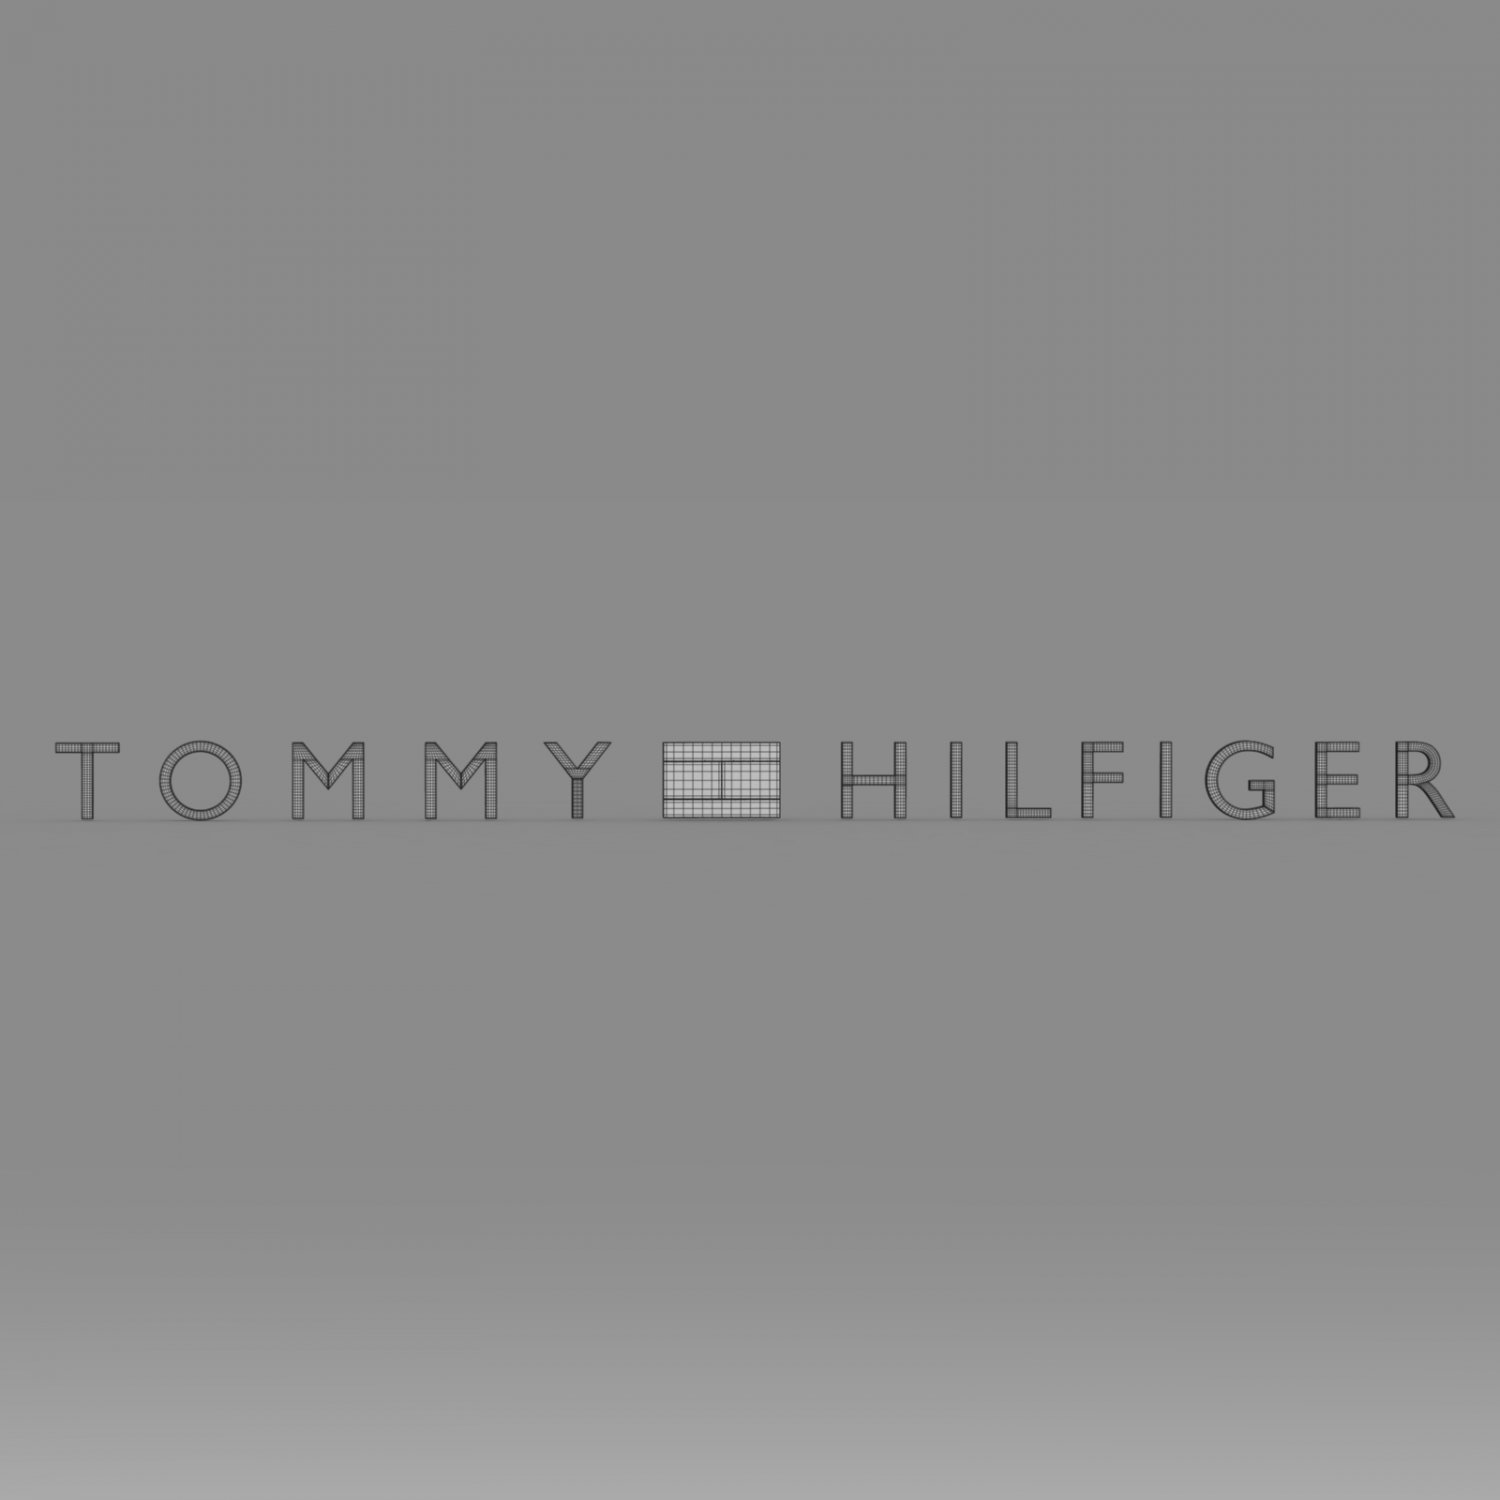 688 Tommy Hilfiger Logo Images, Stock Photos, 3D objects, & Vectors